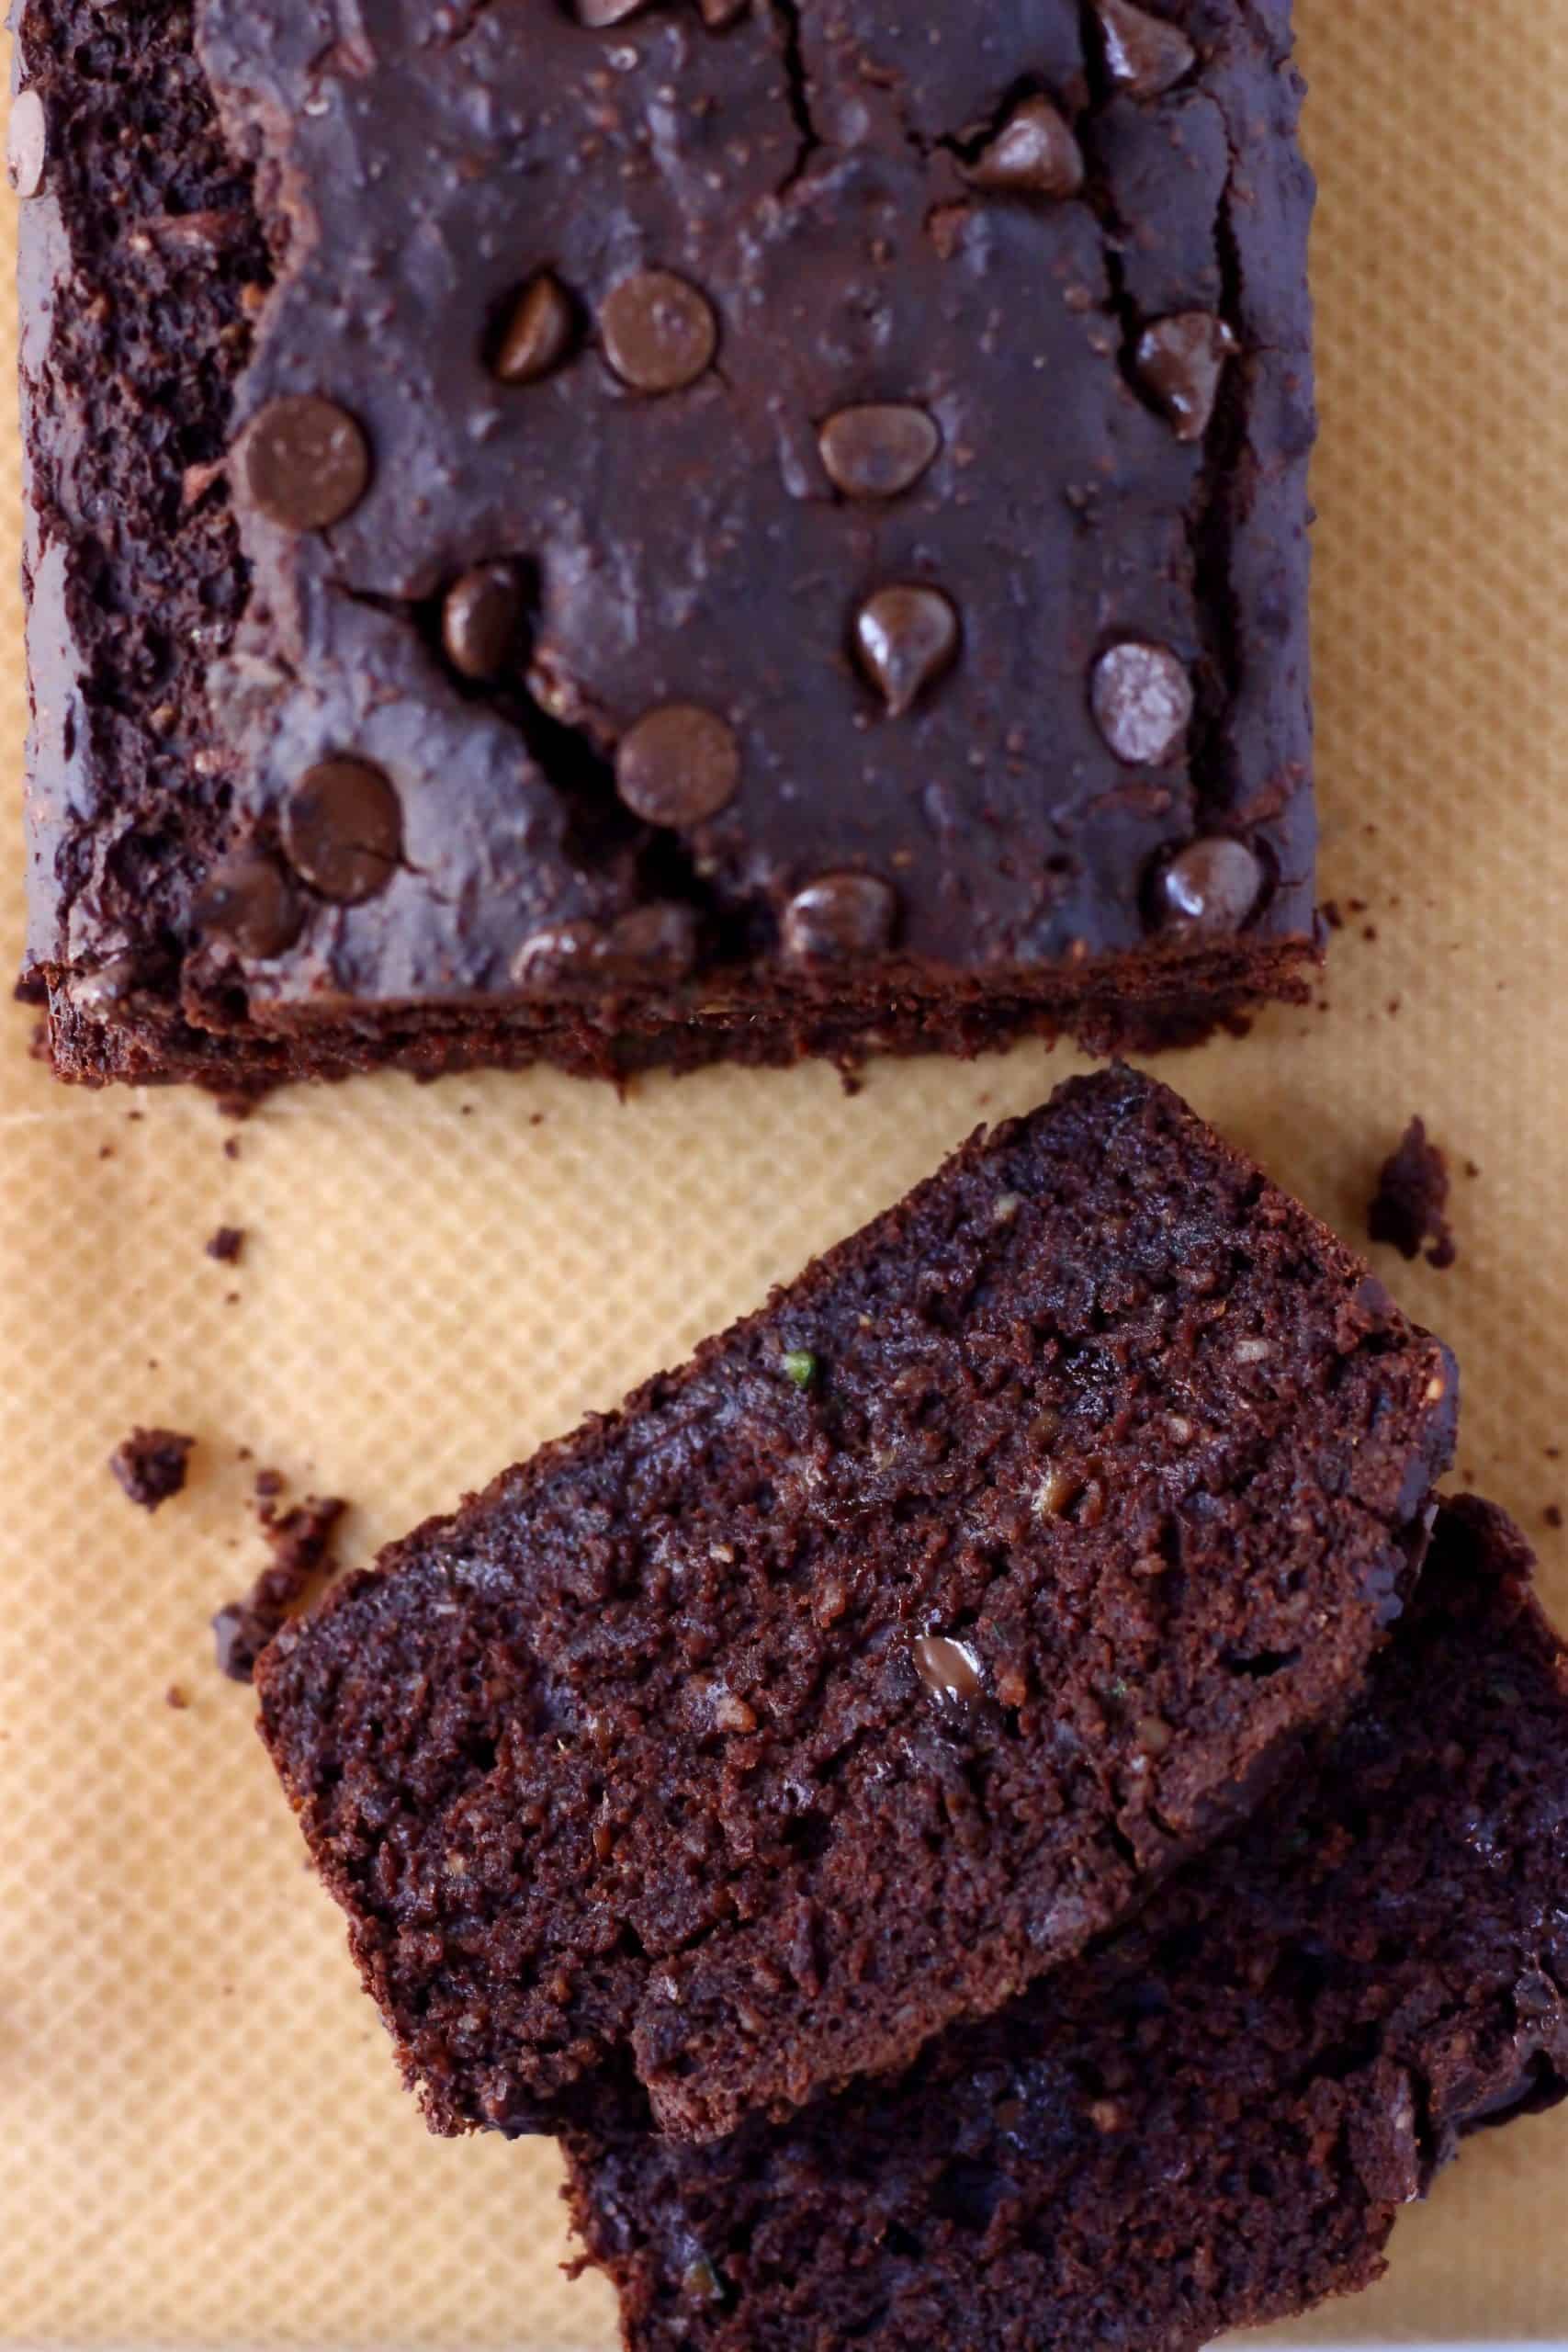 A loaf of chocolate zucchini bread studded with chocolate chips with two slices taken from it against a sheet of brown baking paper